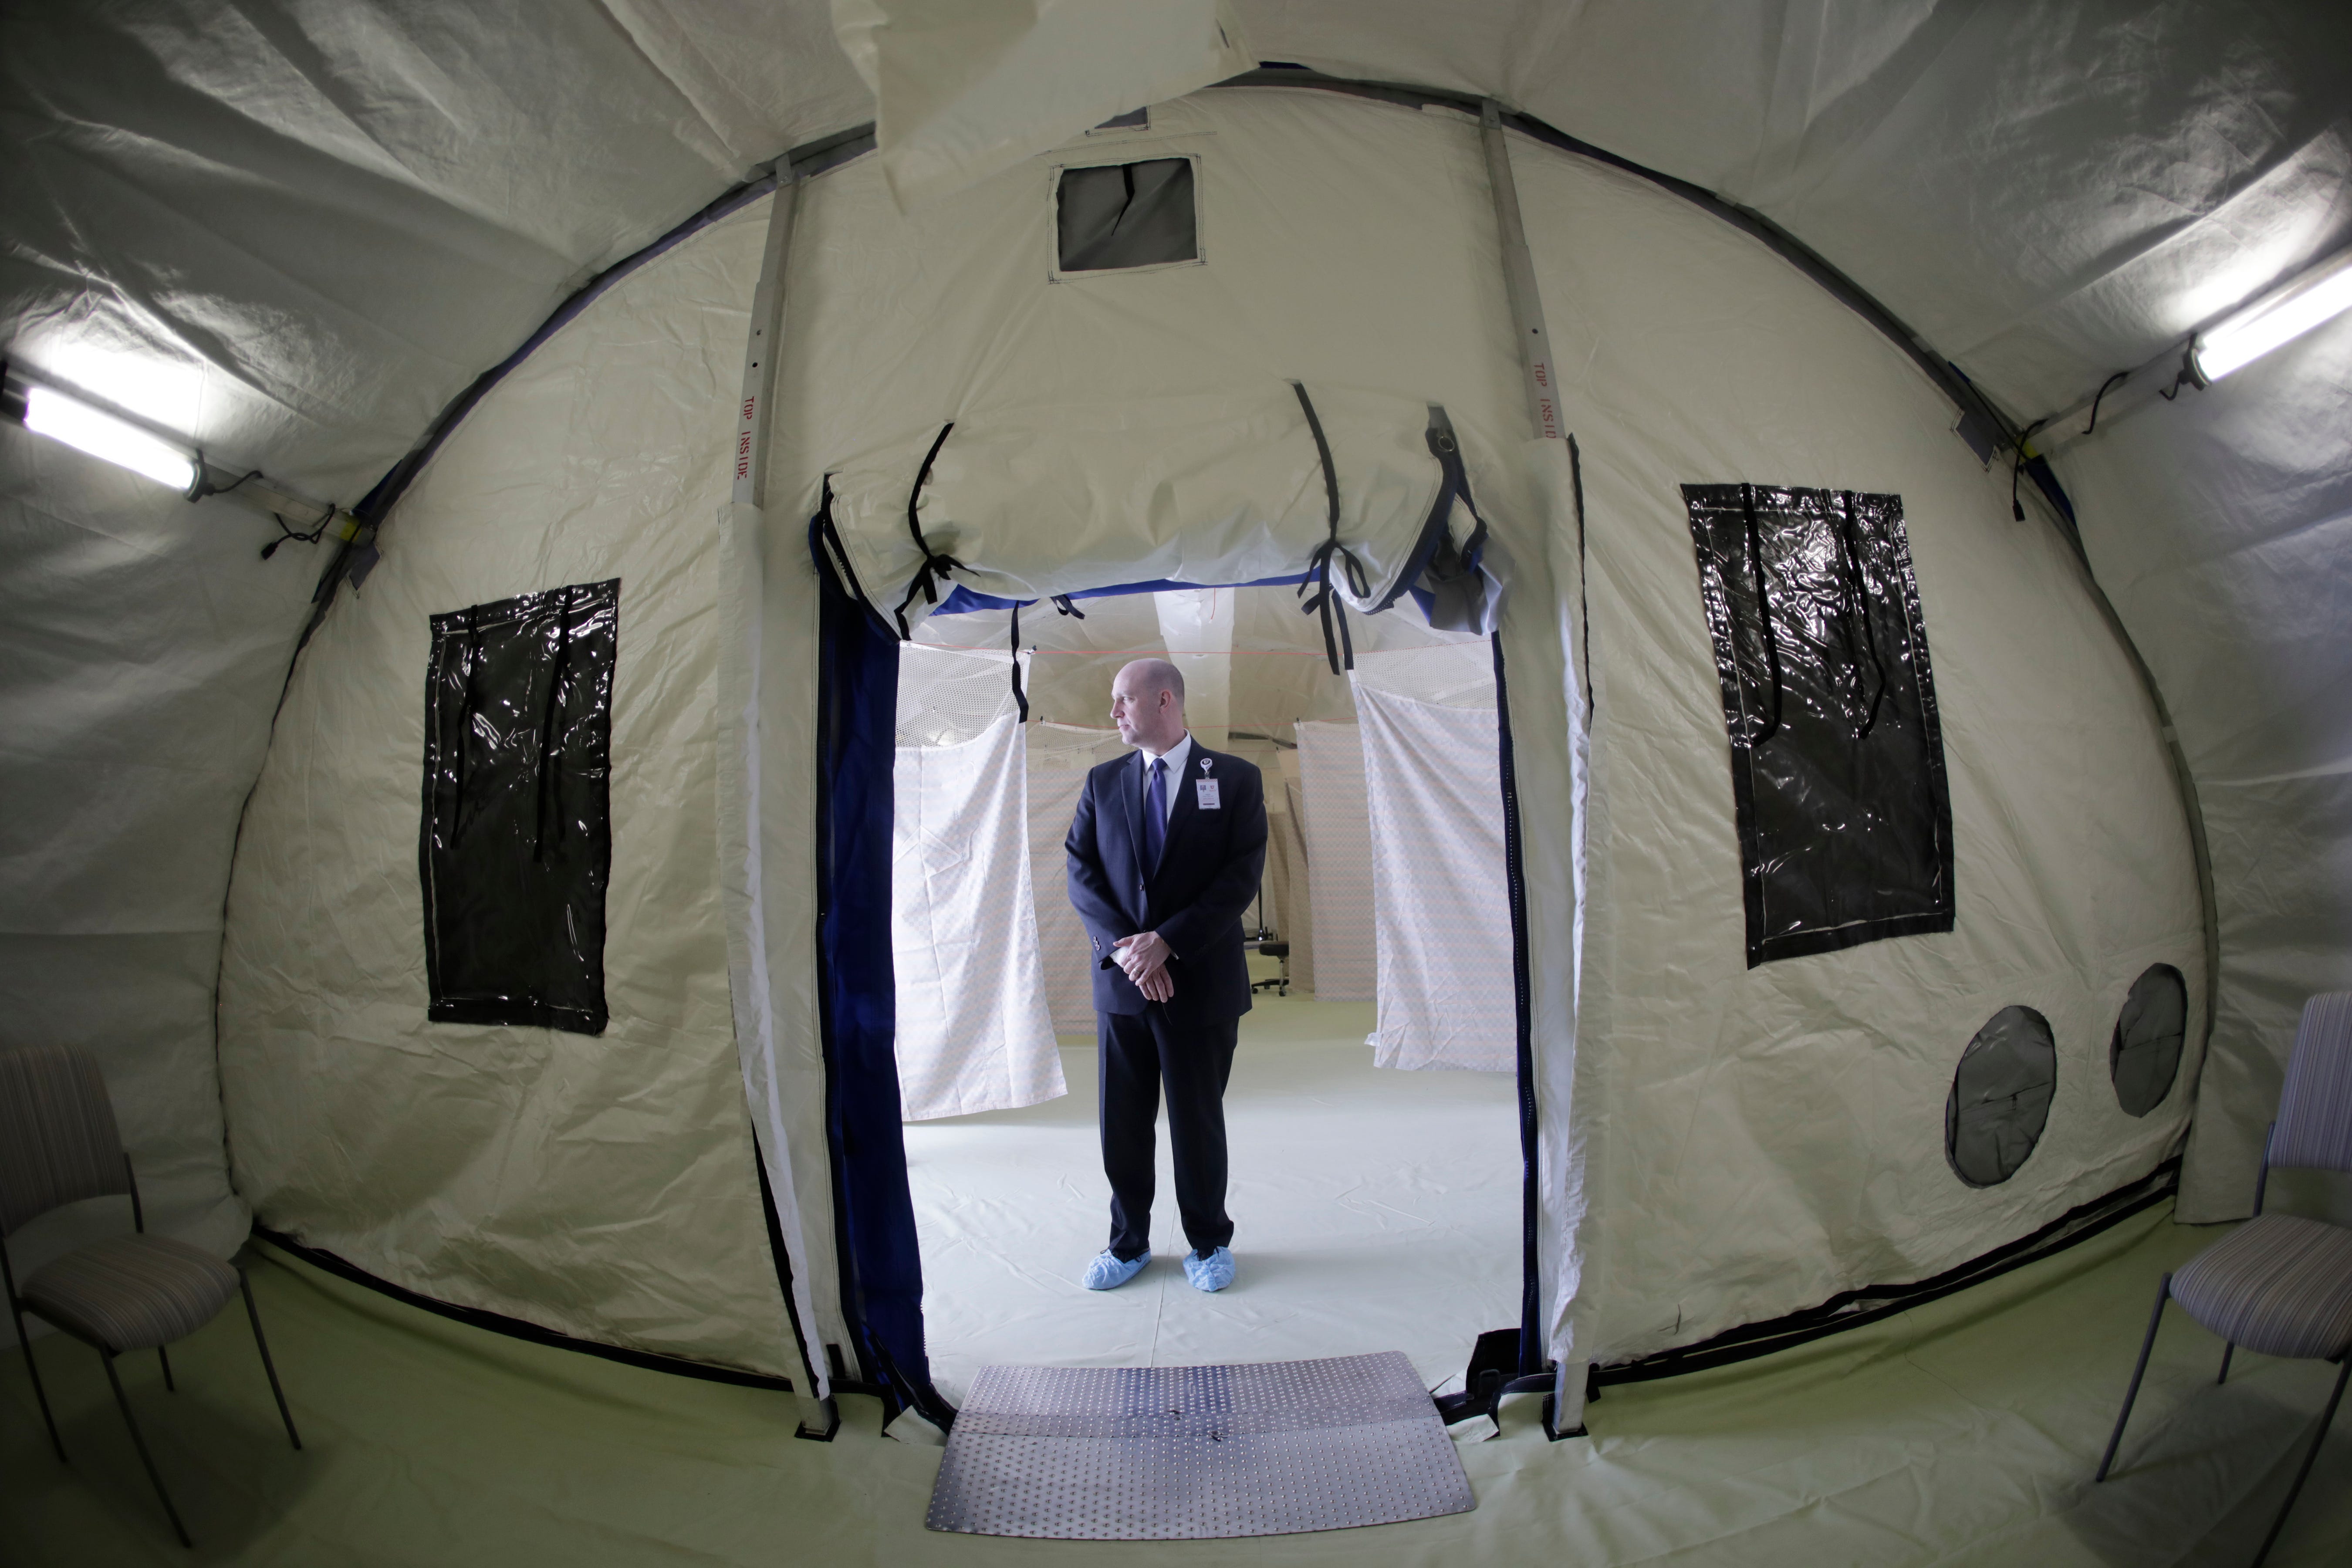 Philip Chaffee, senior director emergency management stands in a negative pressure tent outside the University of Utah's hospital, Monday, March 9, 2020, in Salt Lake City. The hospital is taking steps to limit the spread of the new coronavirus, including new visitor policies and the construction of outdoor negative pressure tents where people can be tested without having to go inside the hospital building.